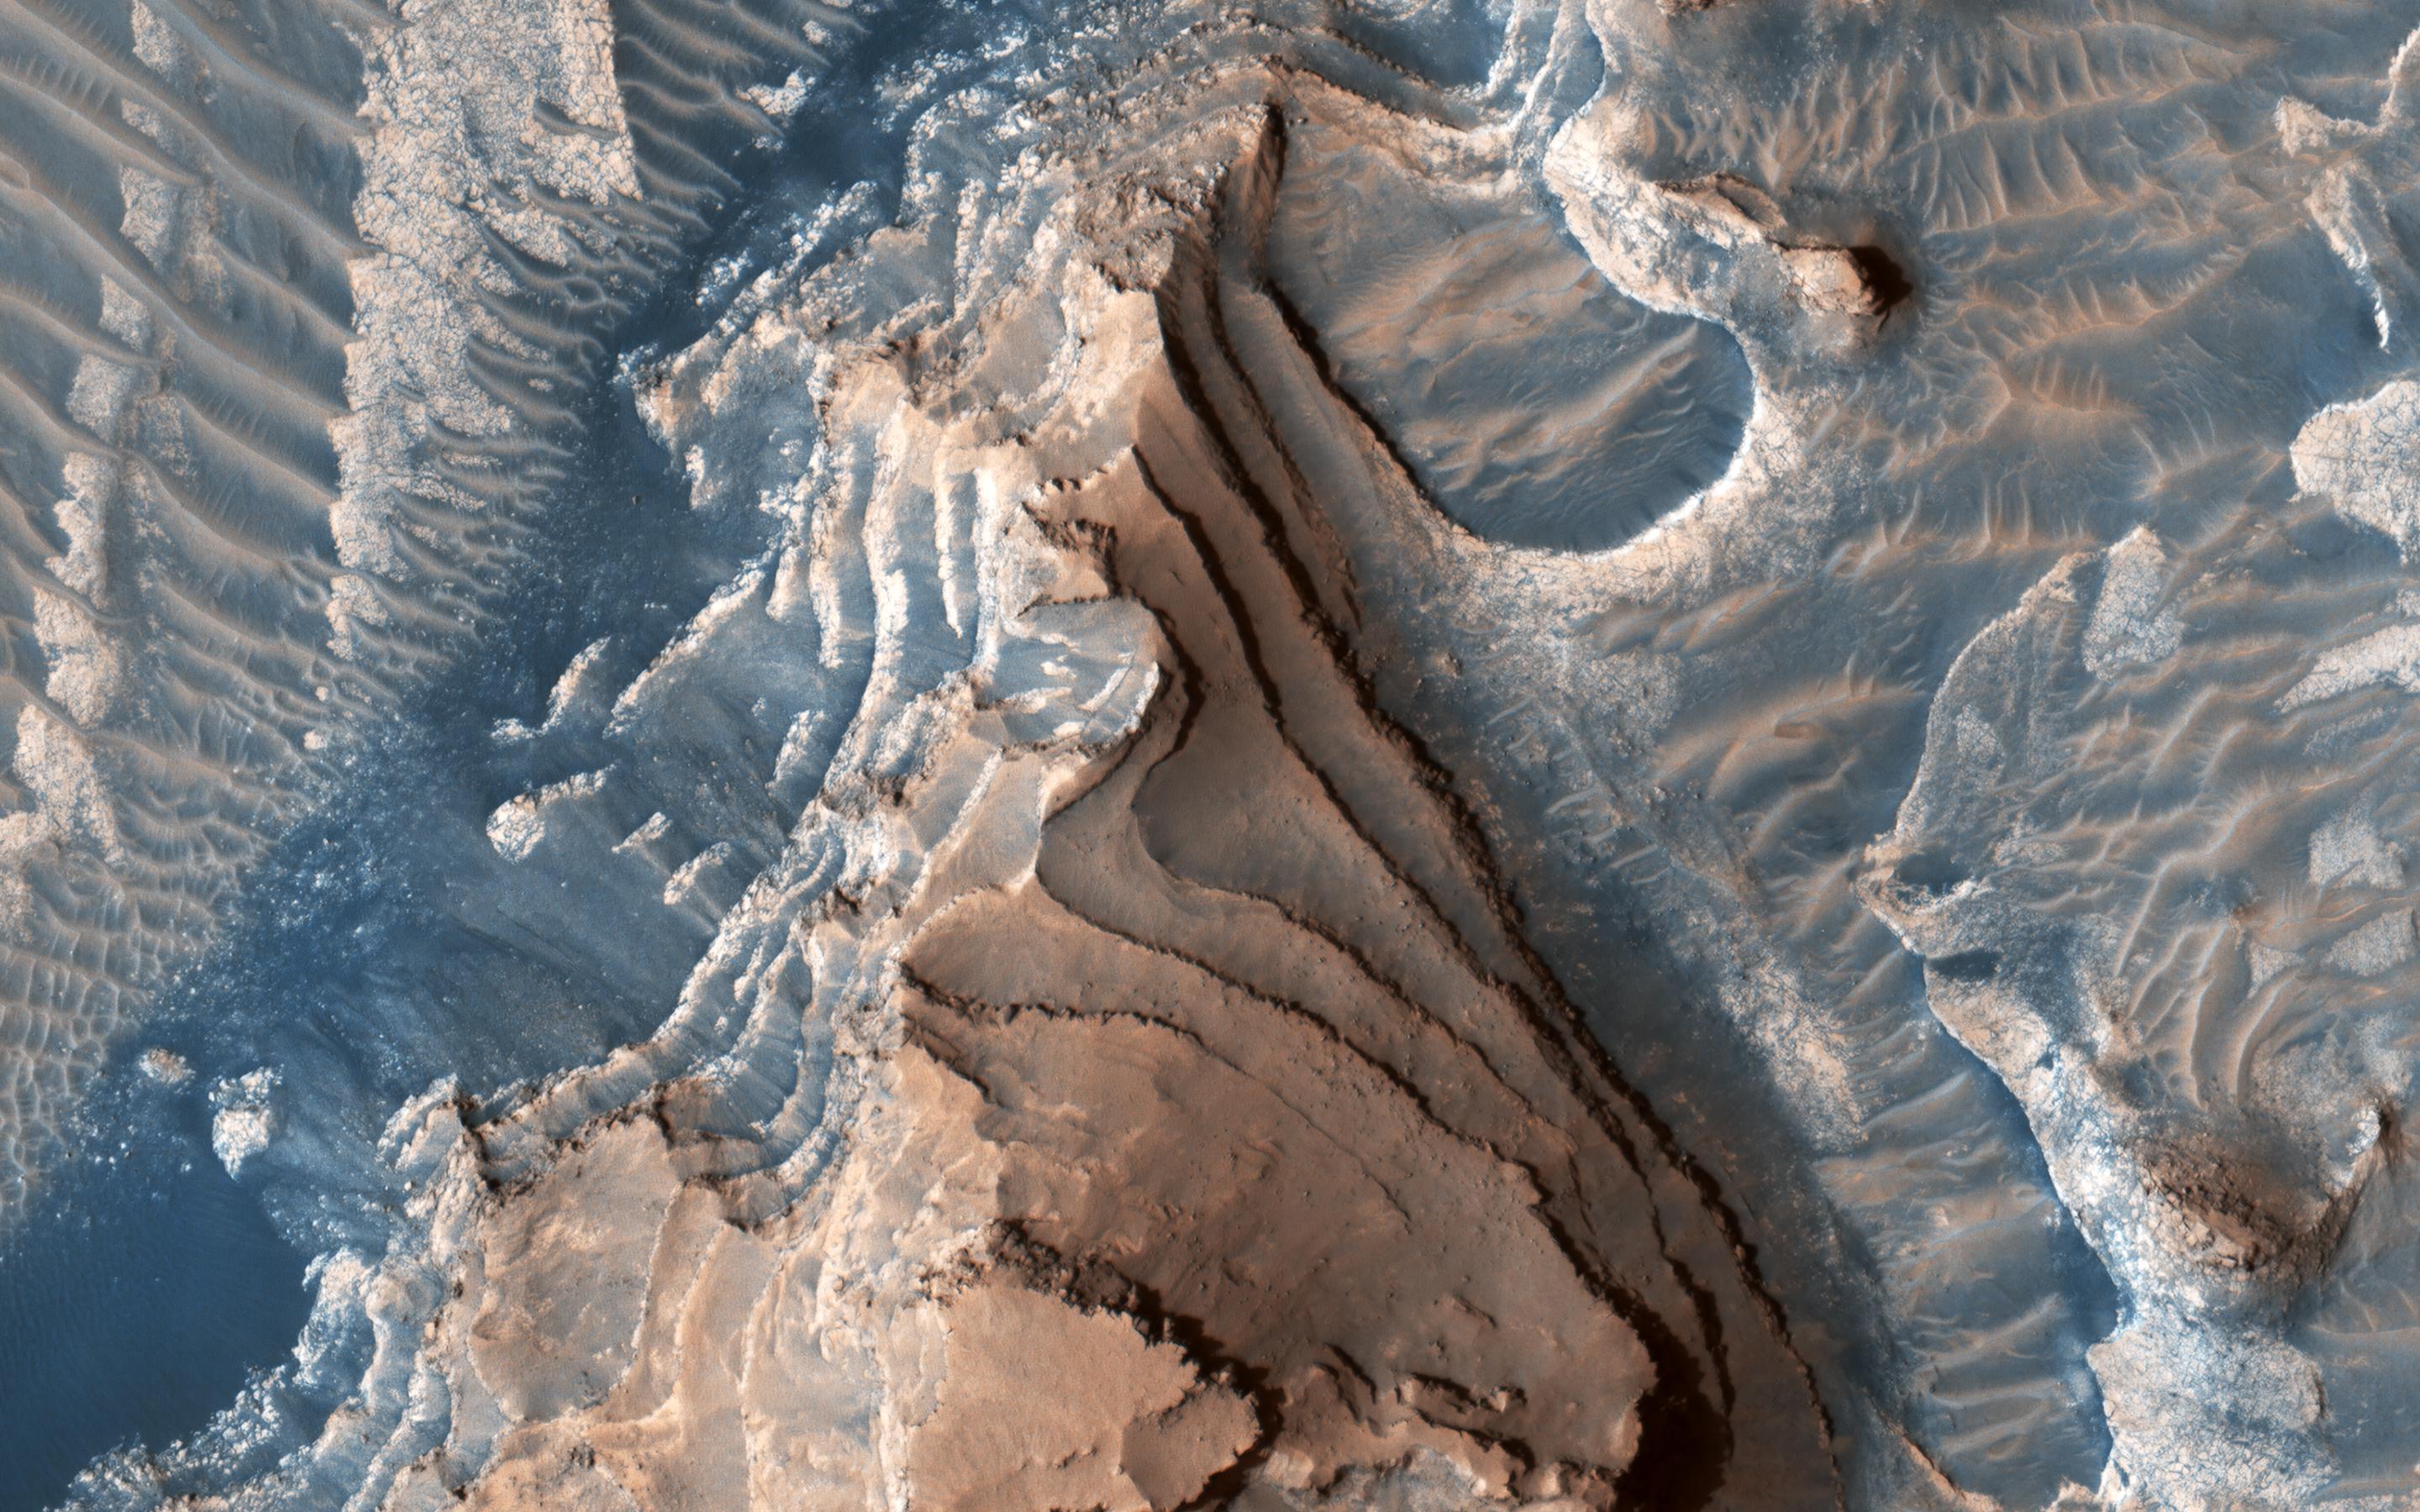 This image acquired on March 21, 2019 by NASAs Mars Reconnaissance Orbiter, shows an eroded mesa made up of rhythmically layered bedrock that seems to indicate cyclic deposition.